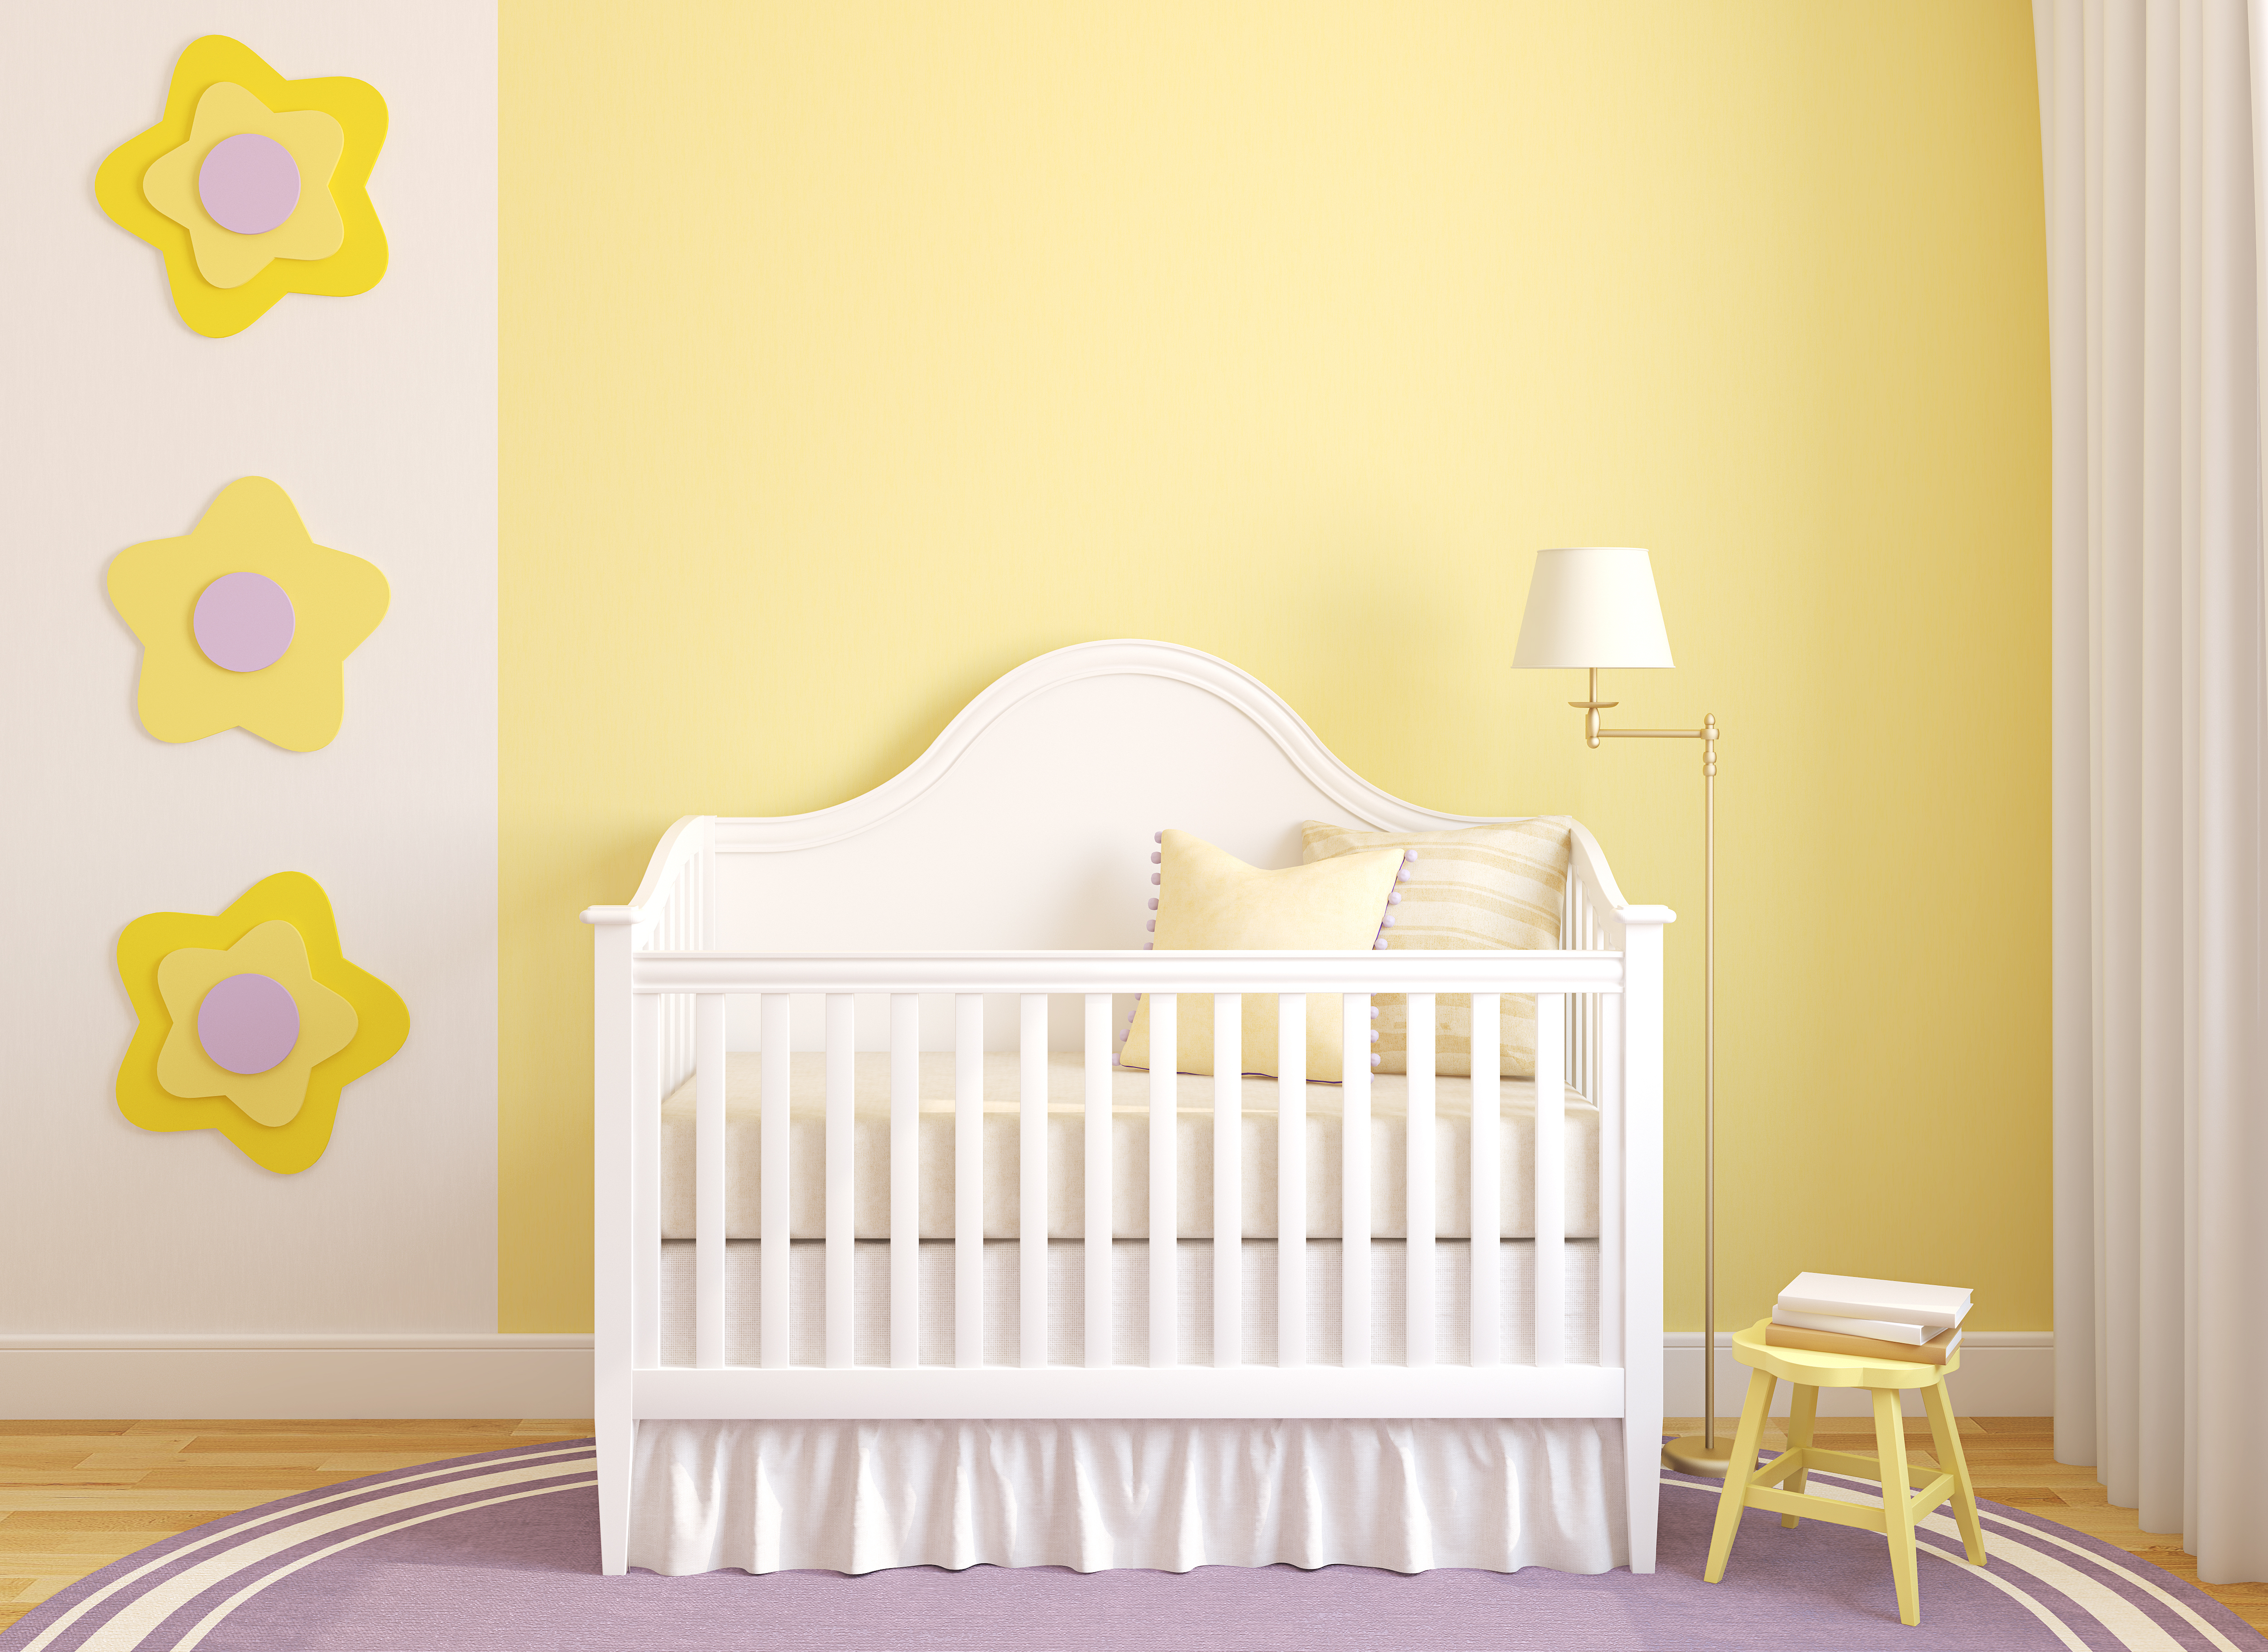 Sunny yellow painted nursery with floral decals and white crib